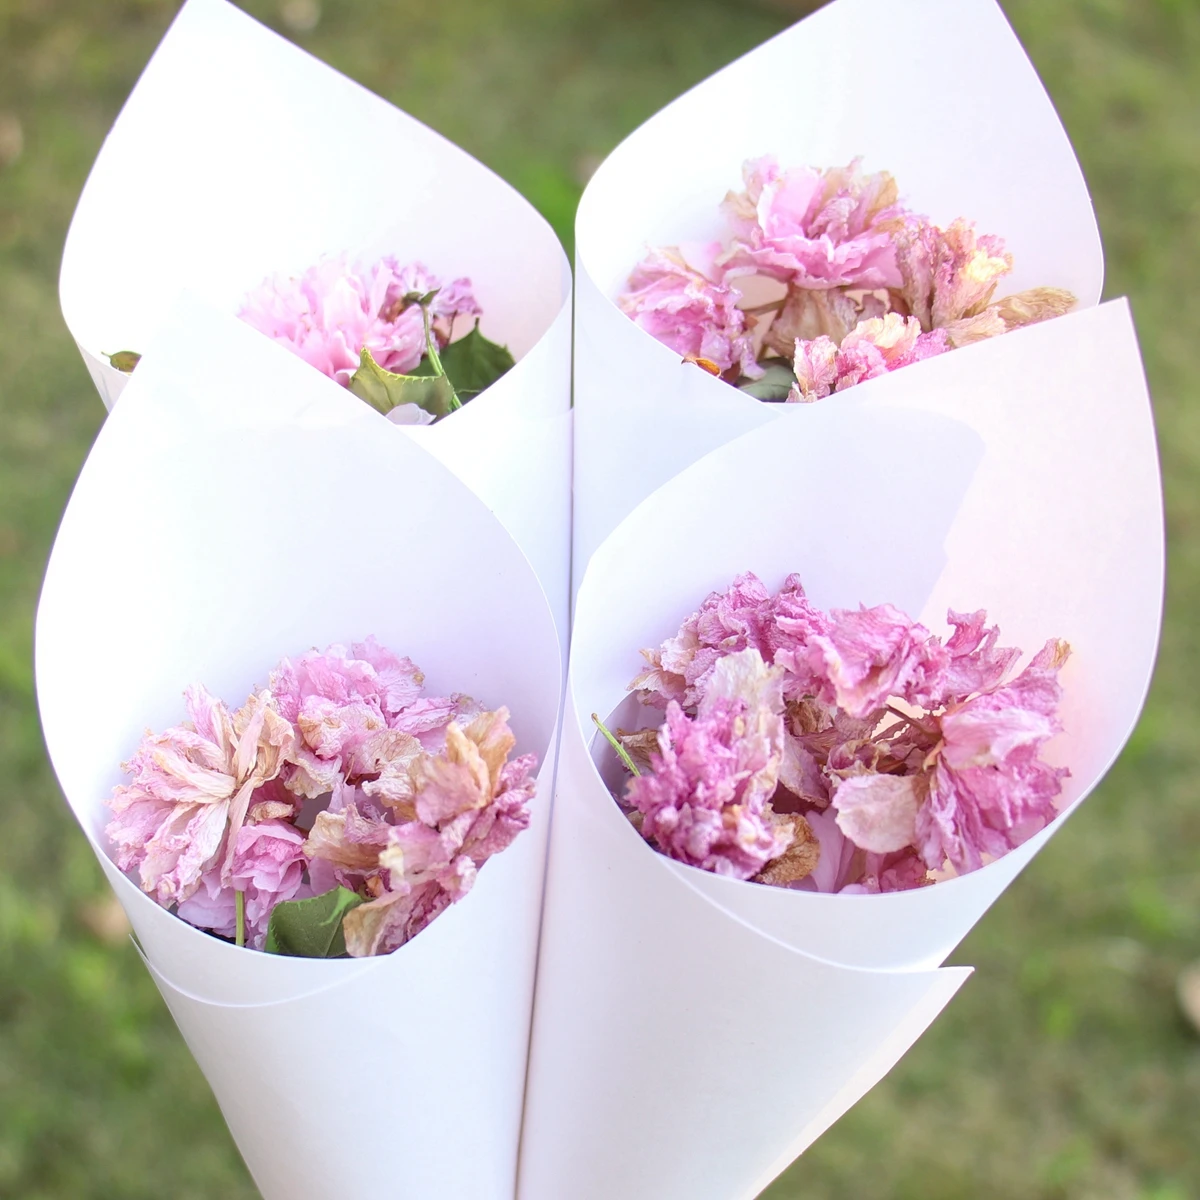 50/100pcs Wedding Cones for Petals Confetti White Laser Hollow Paper Cones  for Dry Flowers Wedding Party Favors Confetti Toss - AliExpress